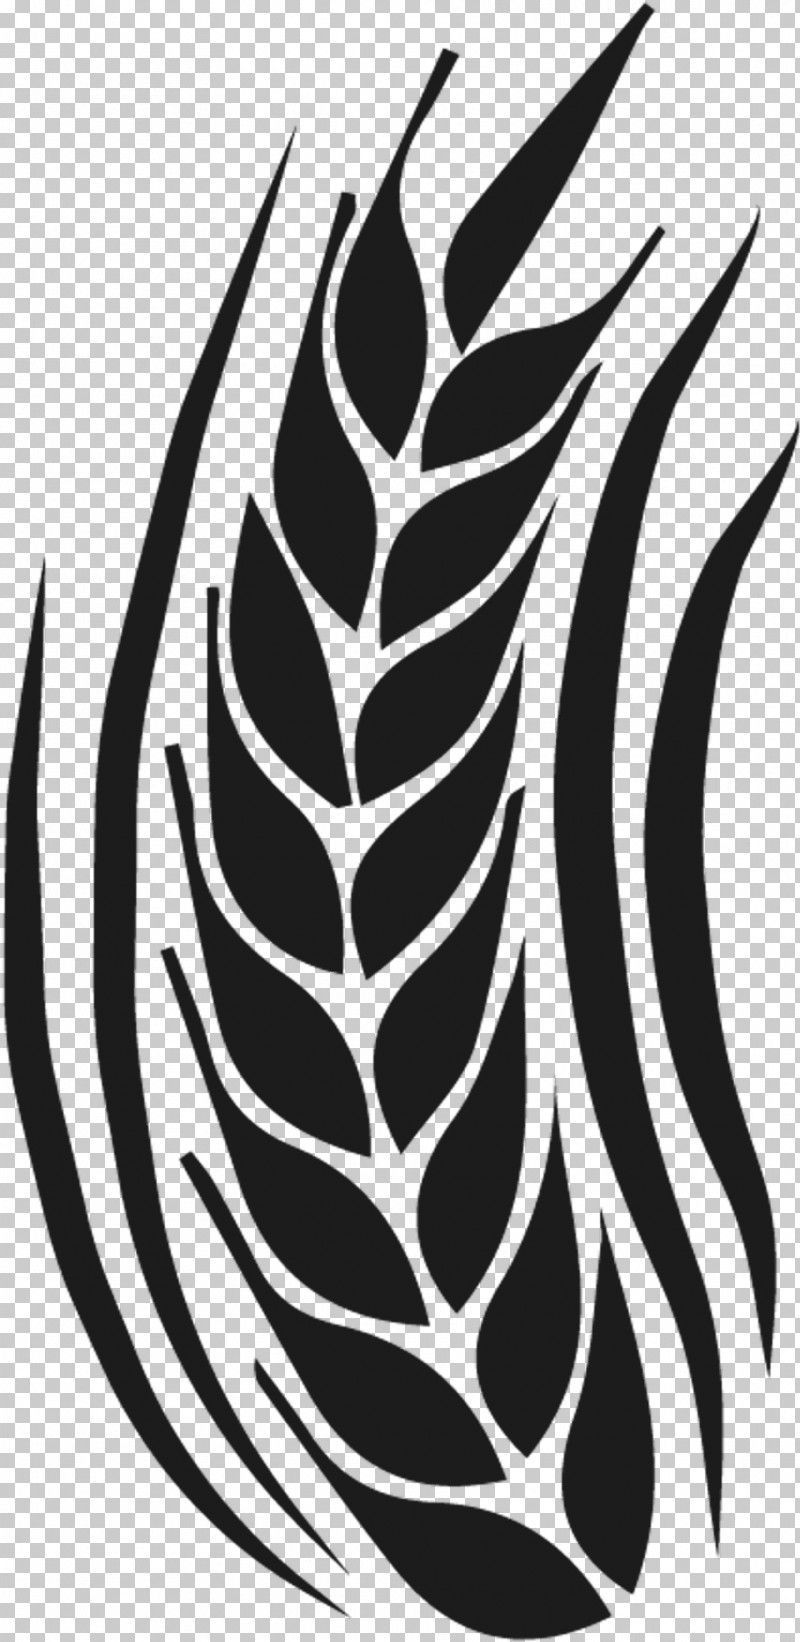 Black-and-white Leaf Pattern Plant Vascular Plant PNG, Clipart, Blackandwhite, Leaf, Plant, Vascular Plant Free PNG Download